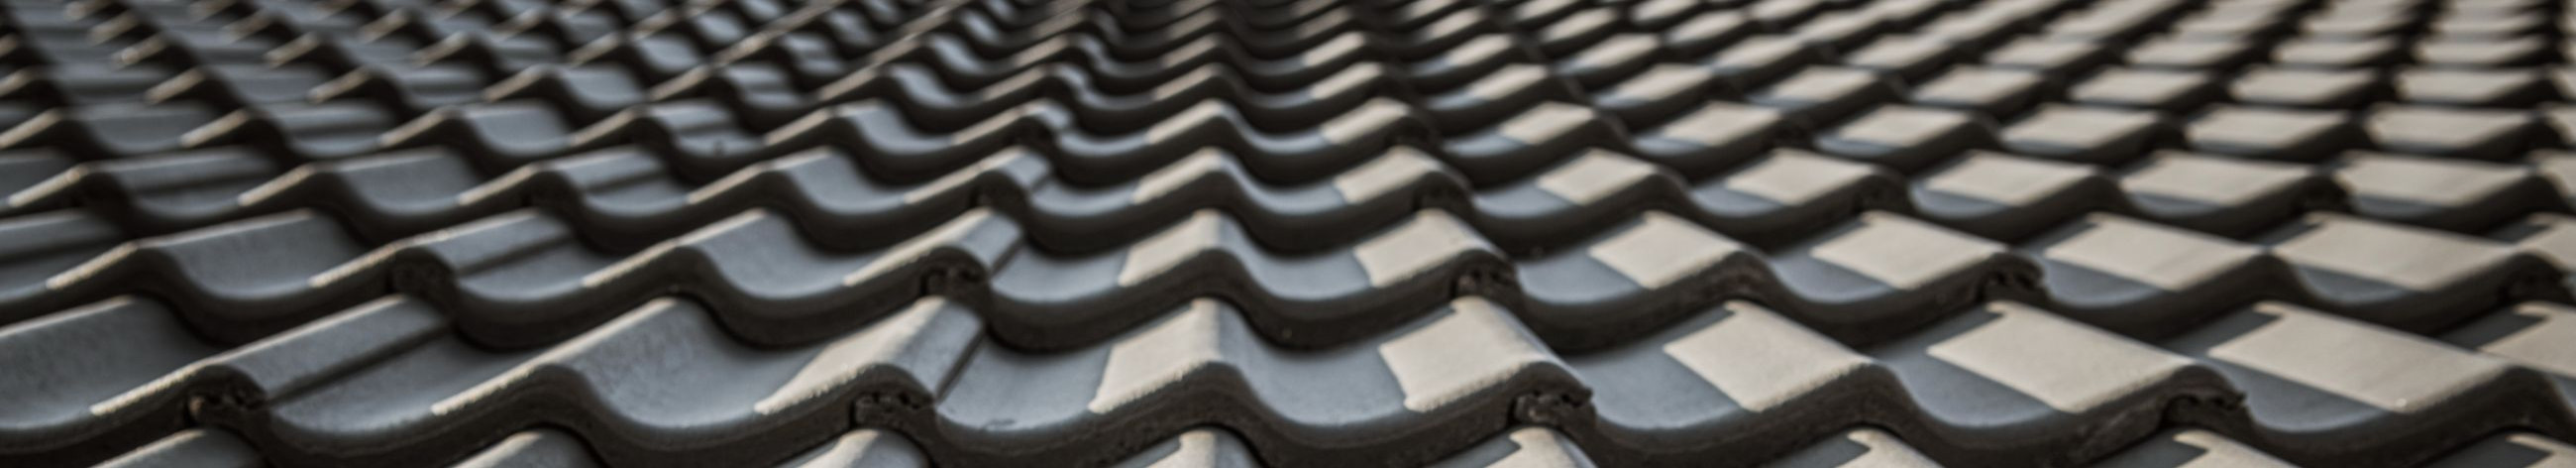 We specialize in roofing, rainwater systems, general construction, terraces, and wooden facades.